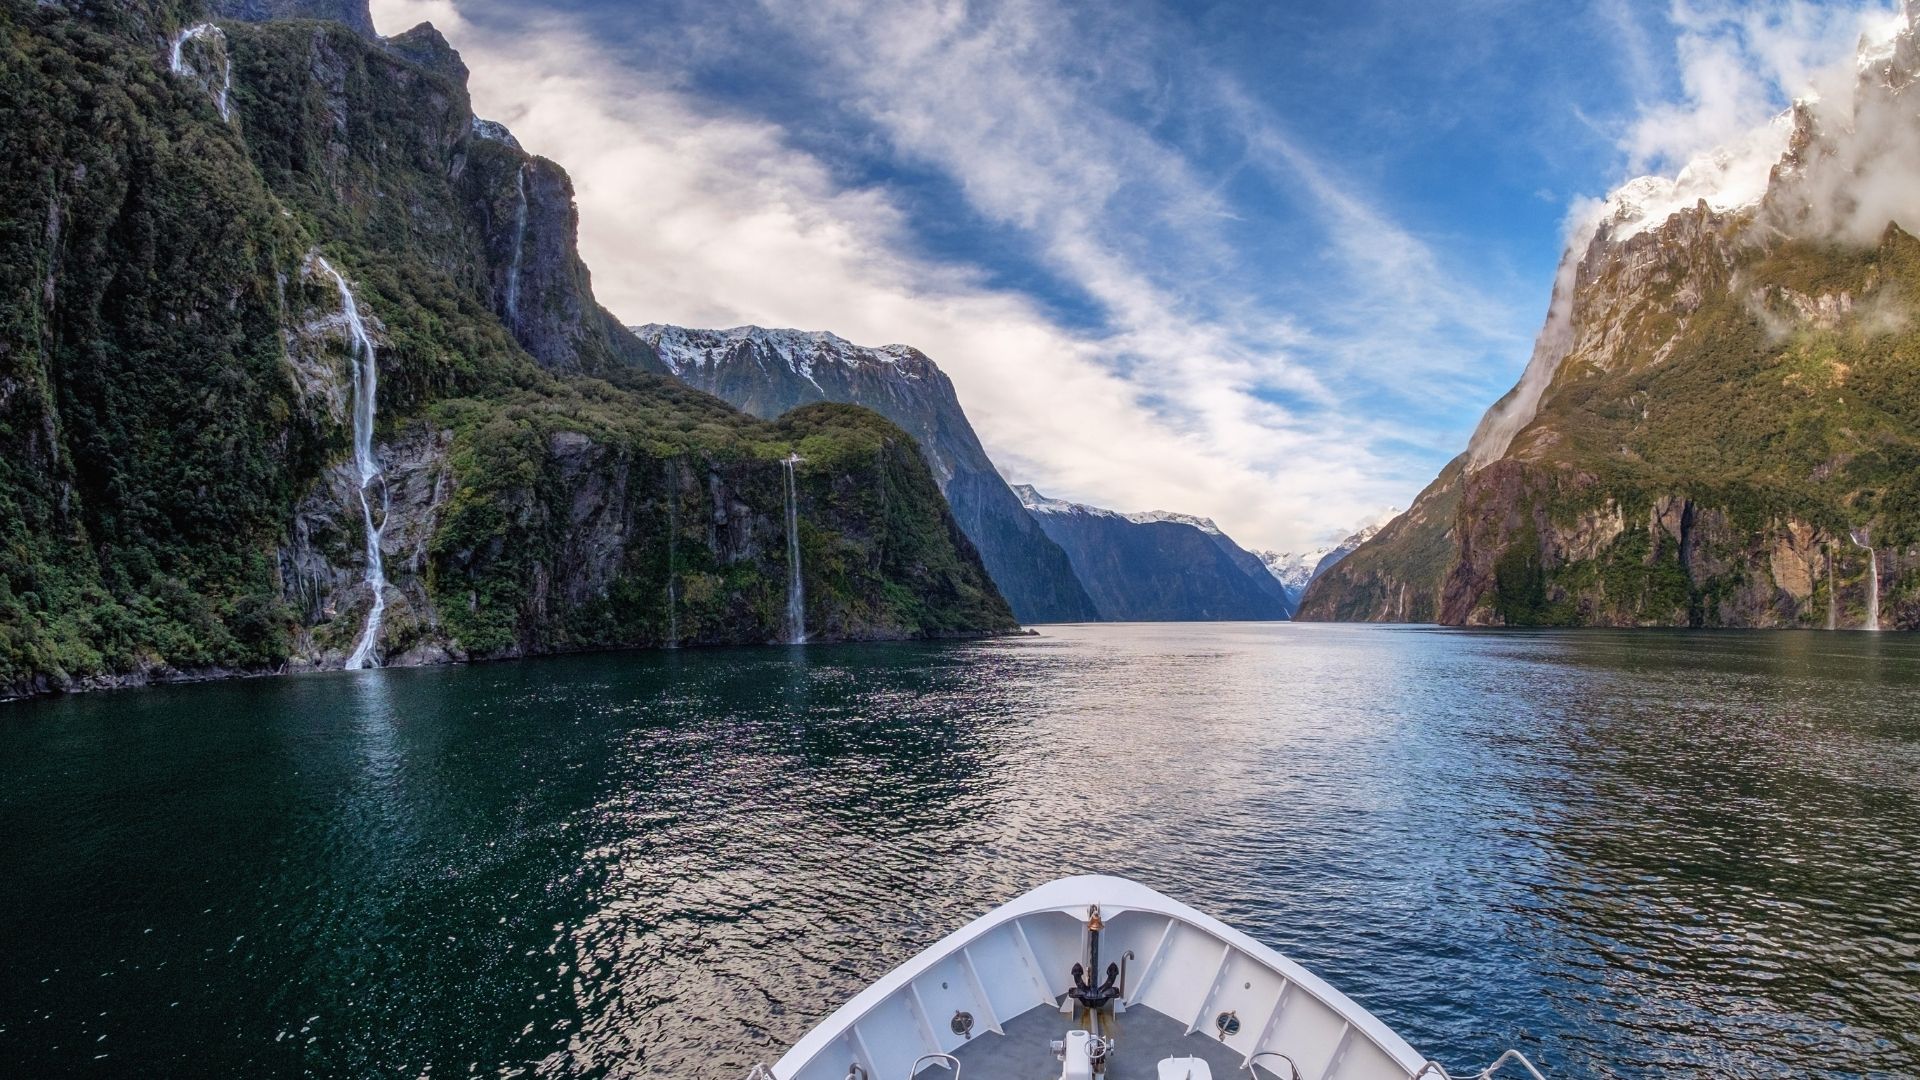 cruise trips from new zealand